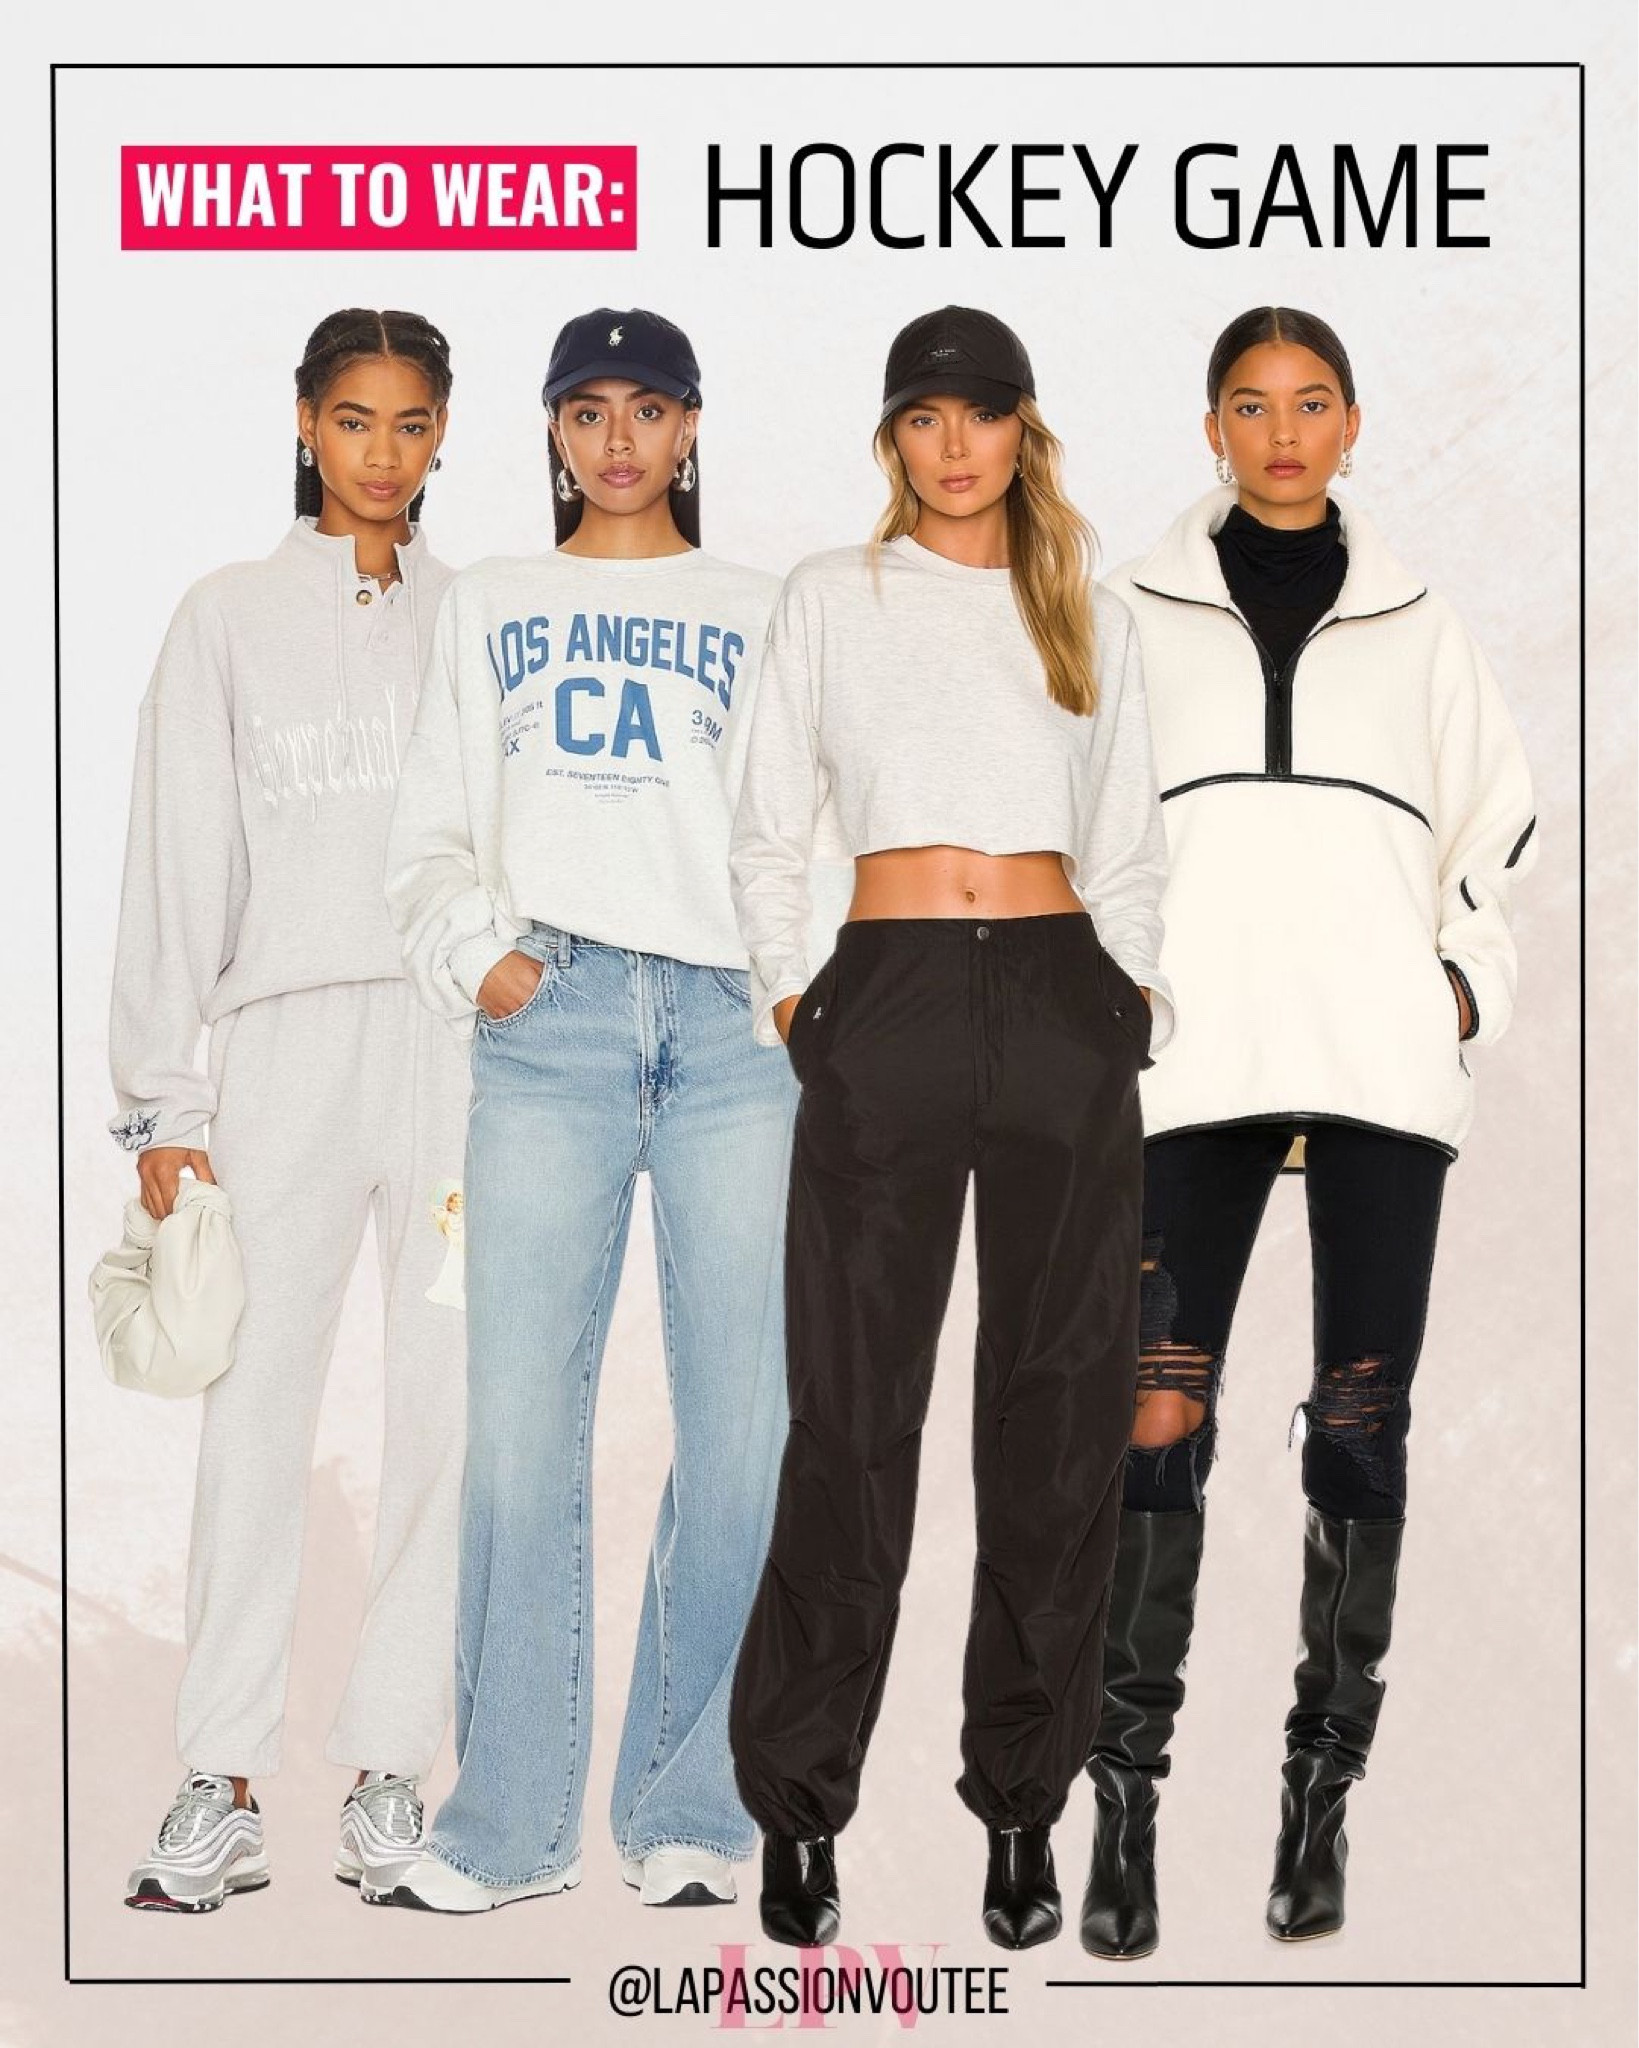 What to wear to an ice hockey game - Buy and Slay